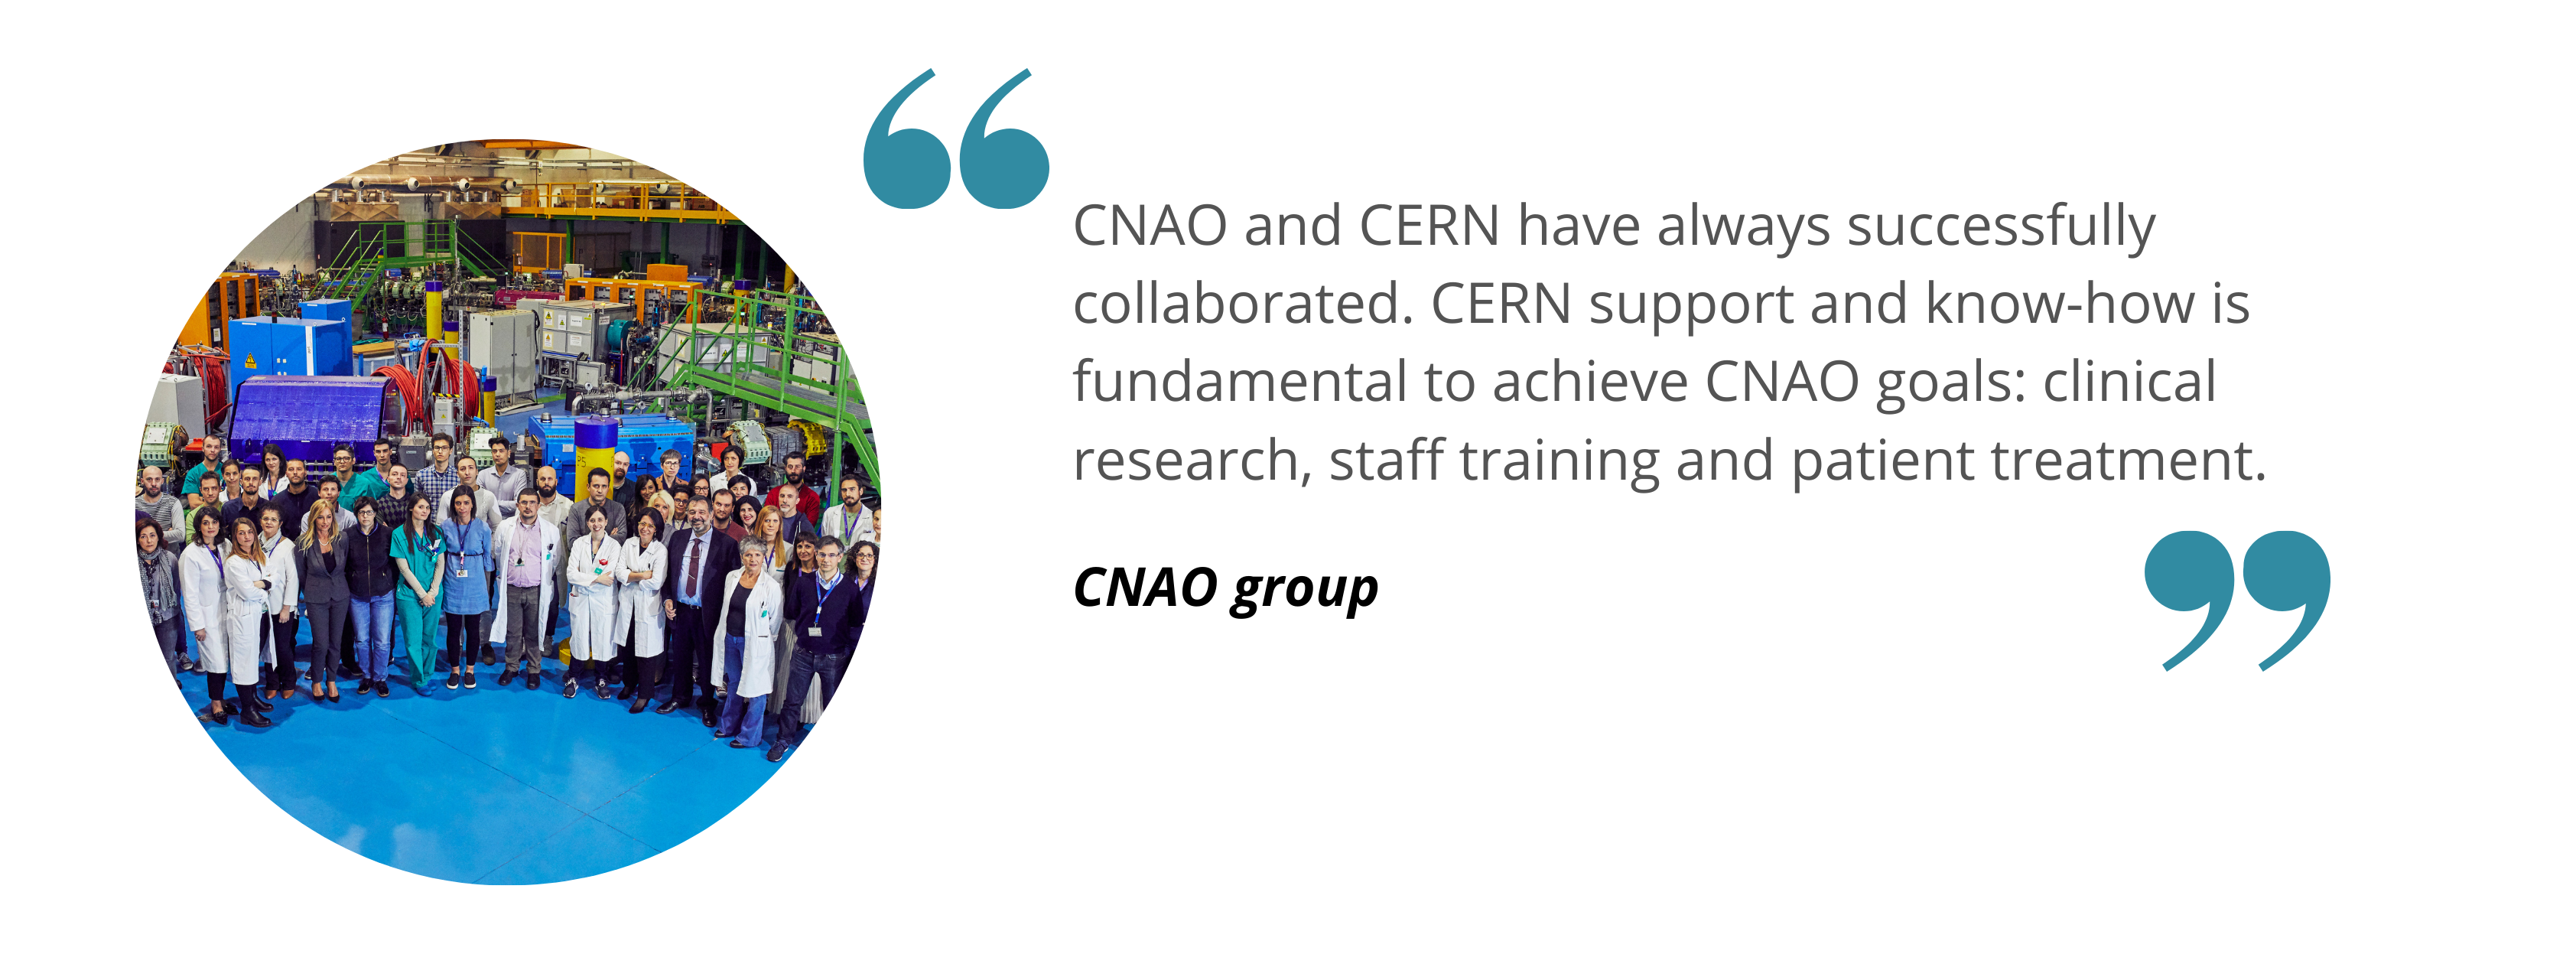 CNAO- CNAO and CERN have always successfully collaborated. CERN support and know-how is fundamental to achieve CNAO goals: clinical research, staff training and patient treatment.